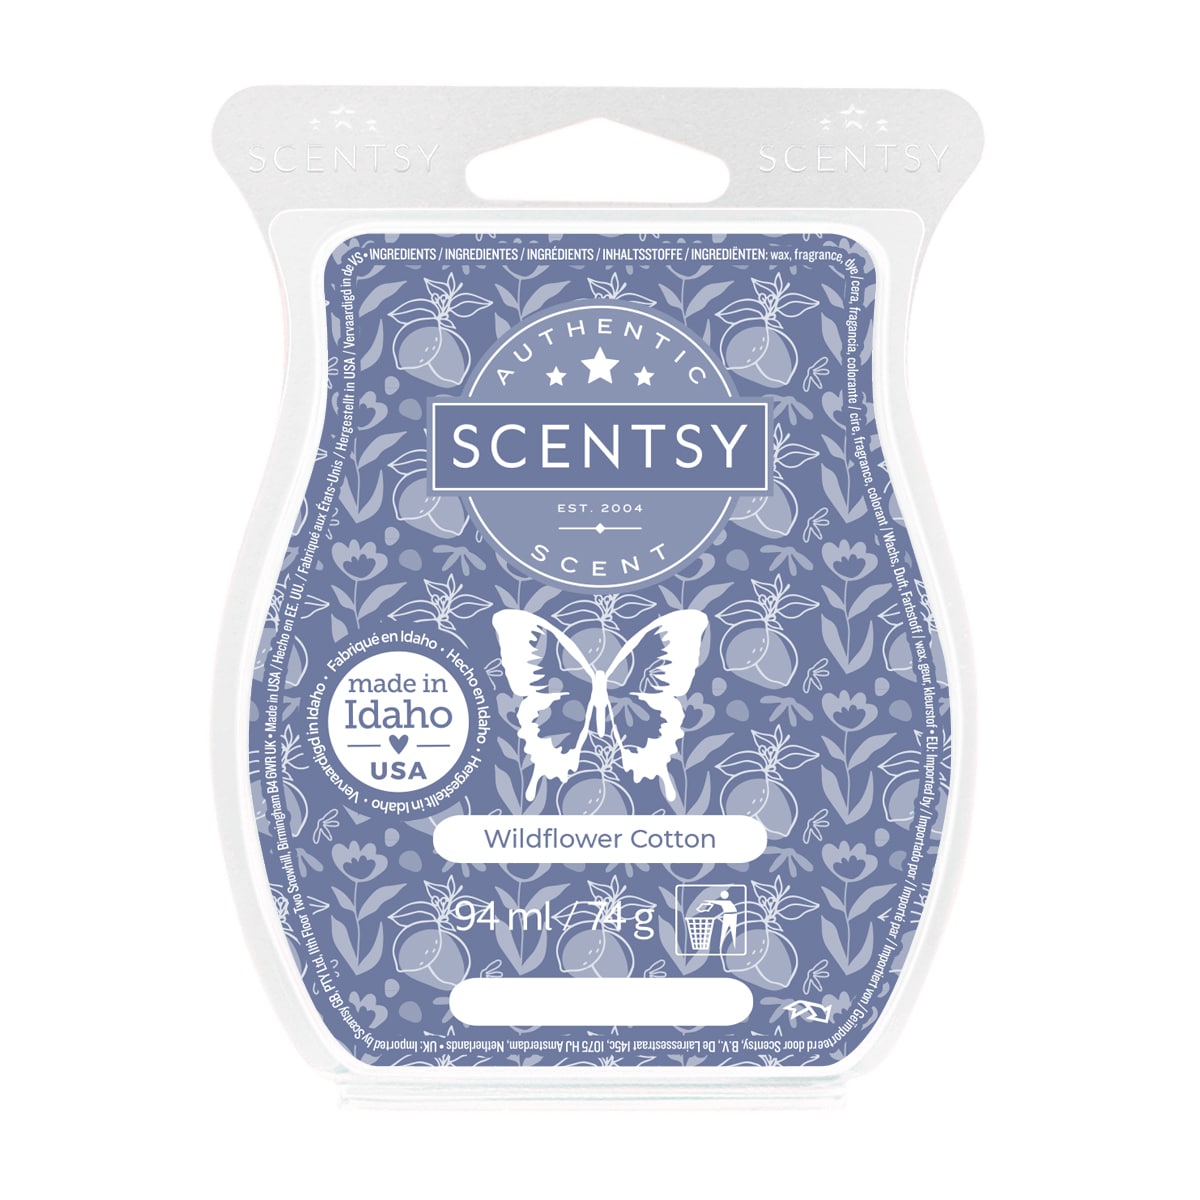 Wildflower Cotton Scentsy Wax Melt - Scentsy Warming Candles